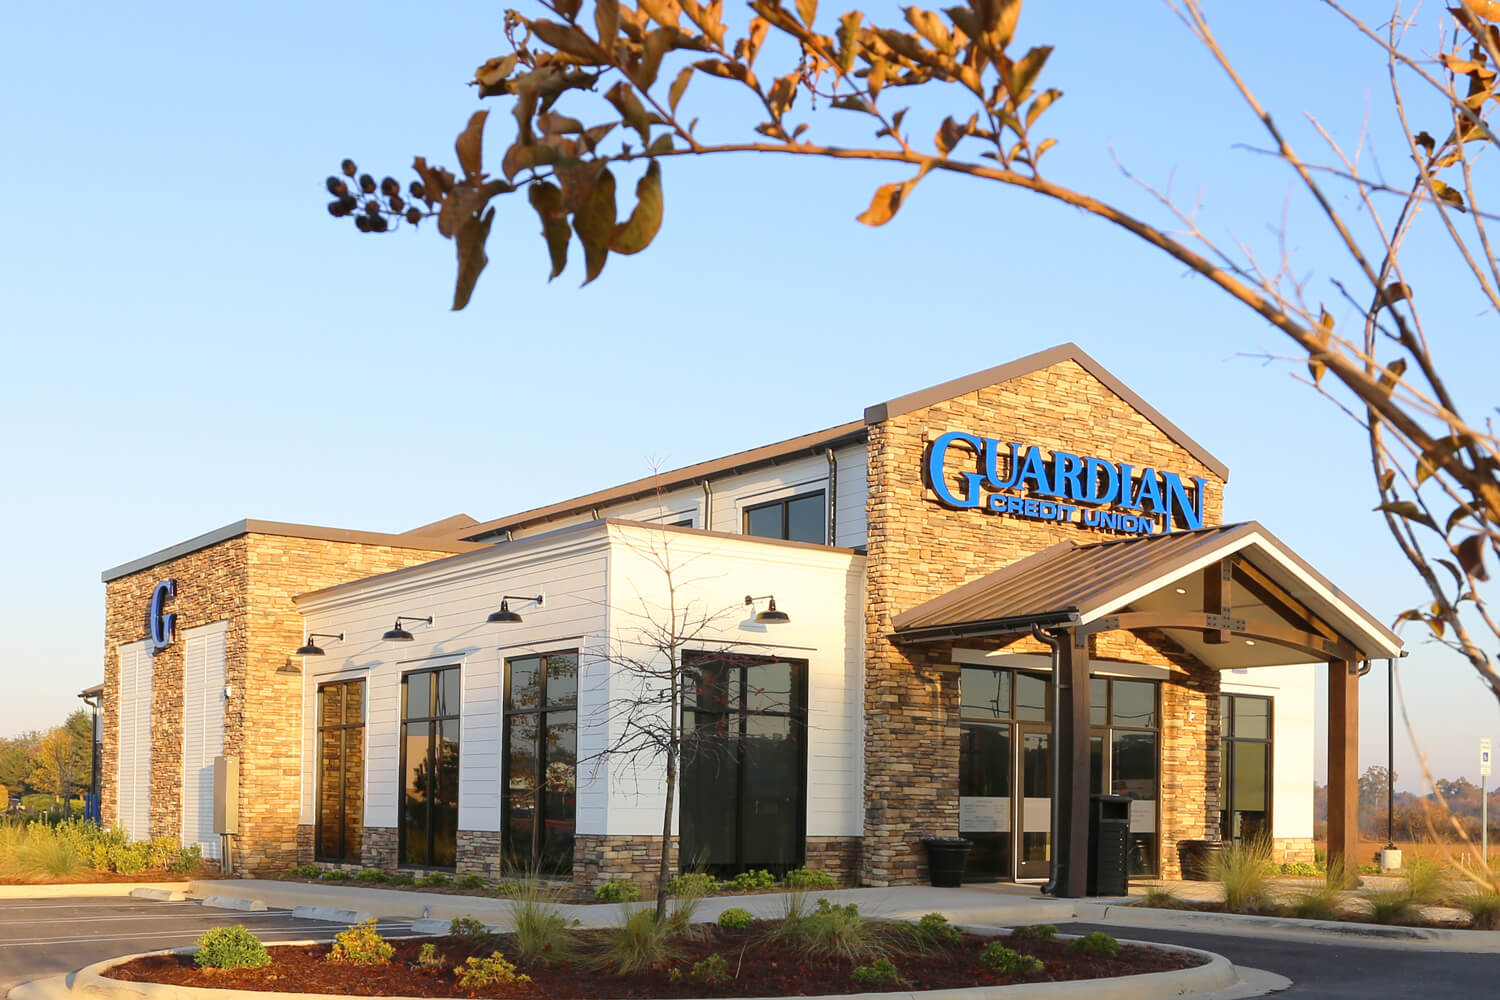 Guardian Credit Union - Wetumpka - Left Exterior - Designed by Foshee Architecture